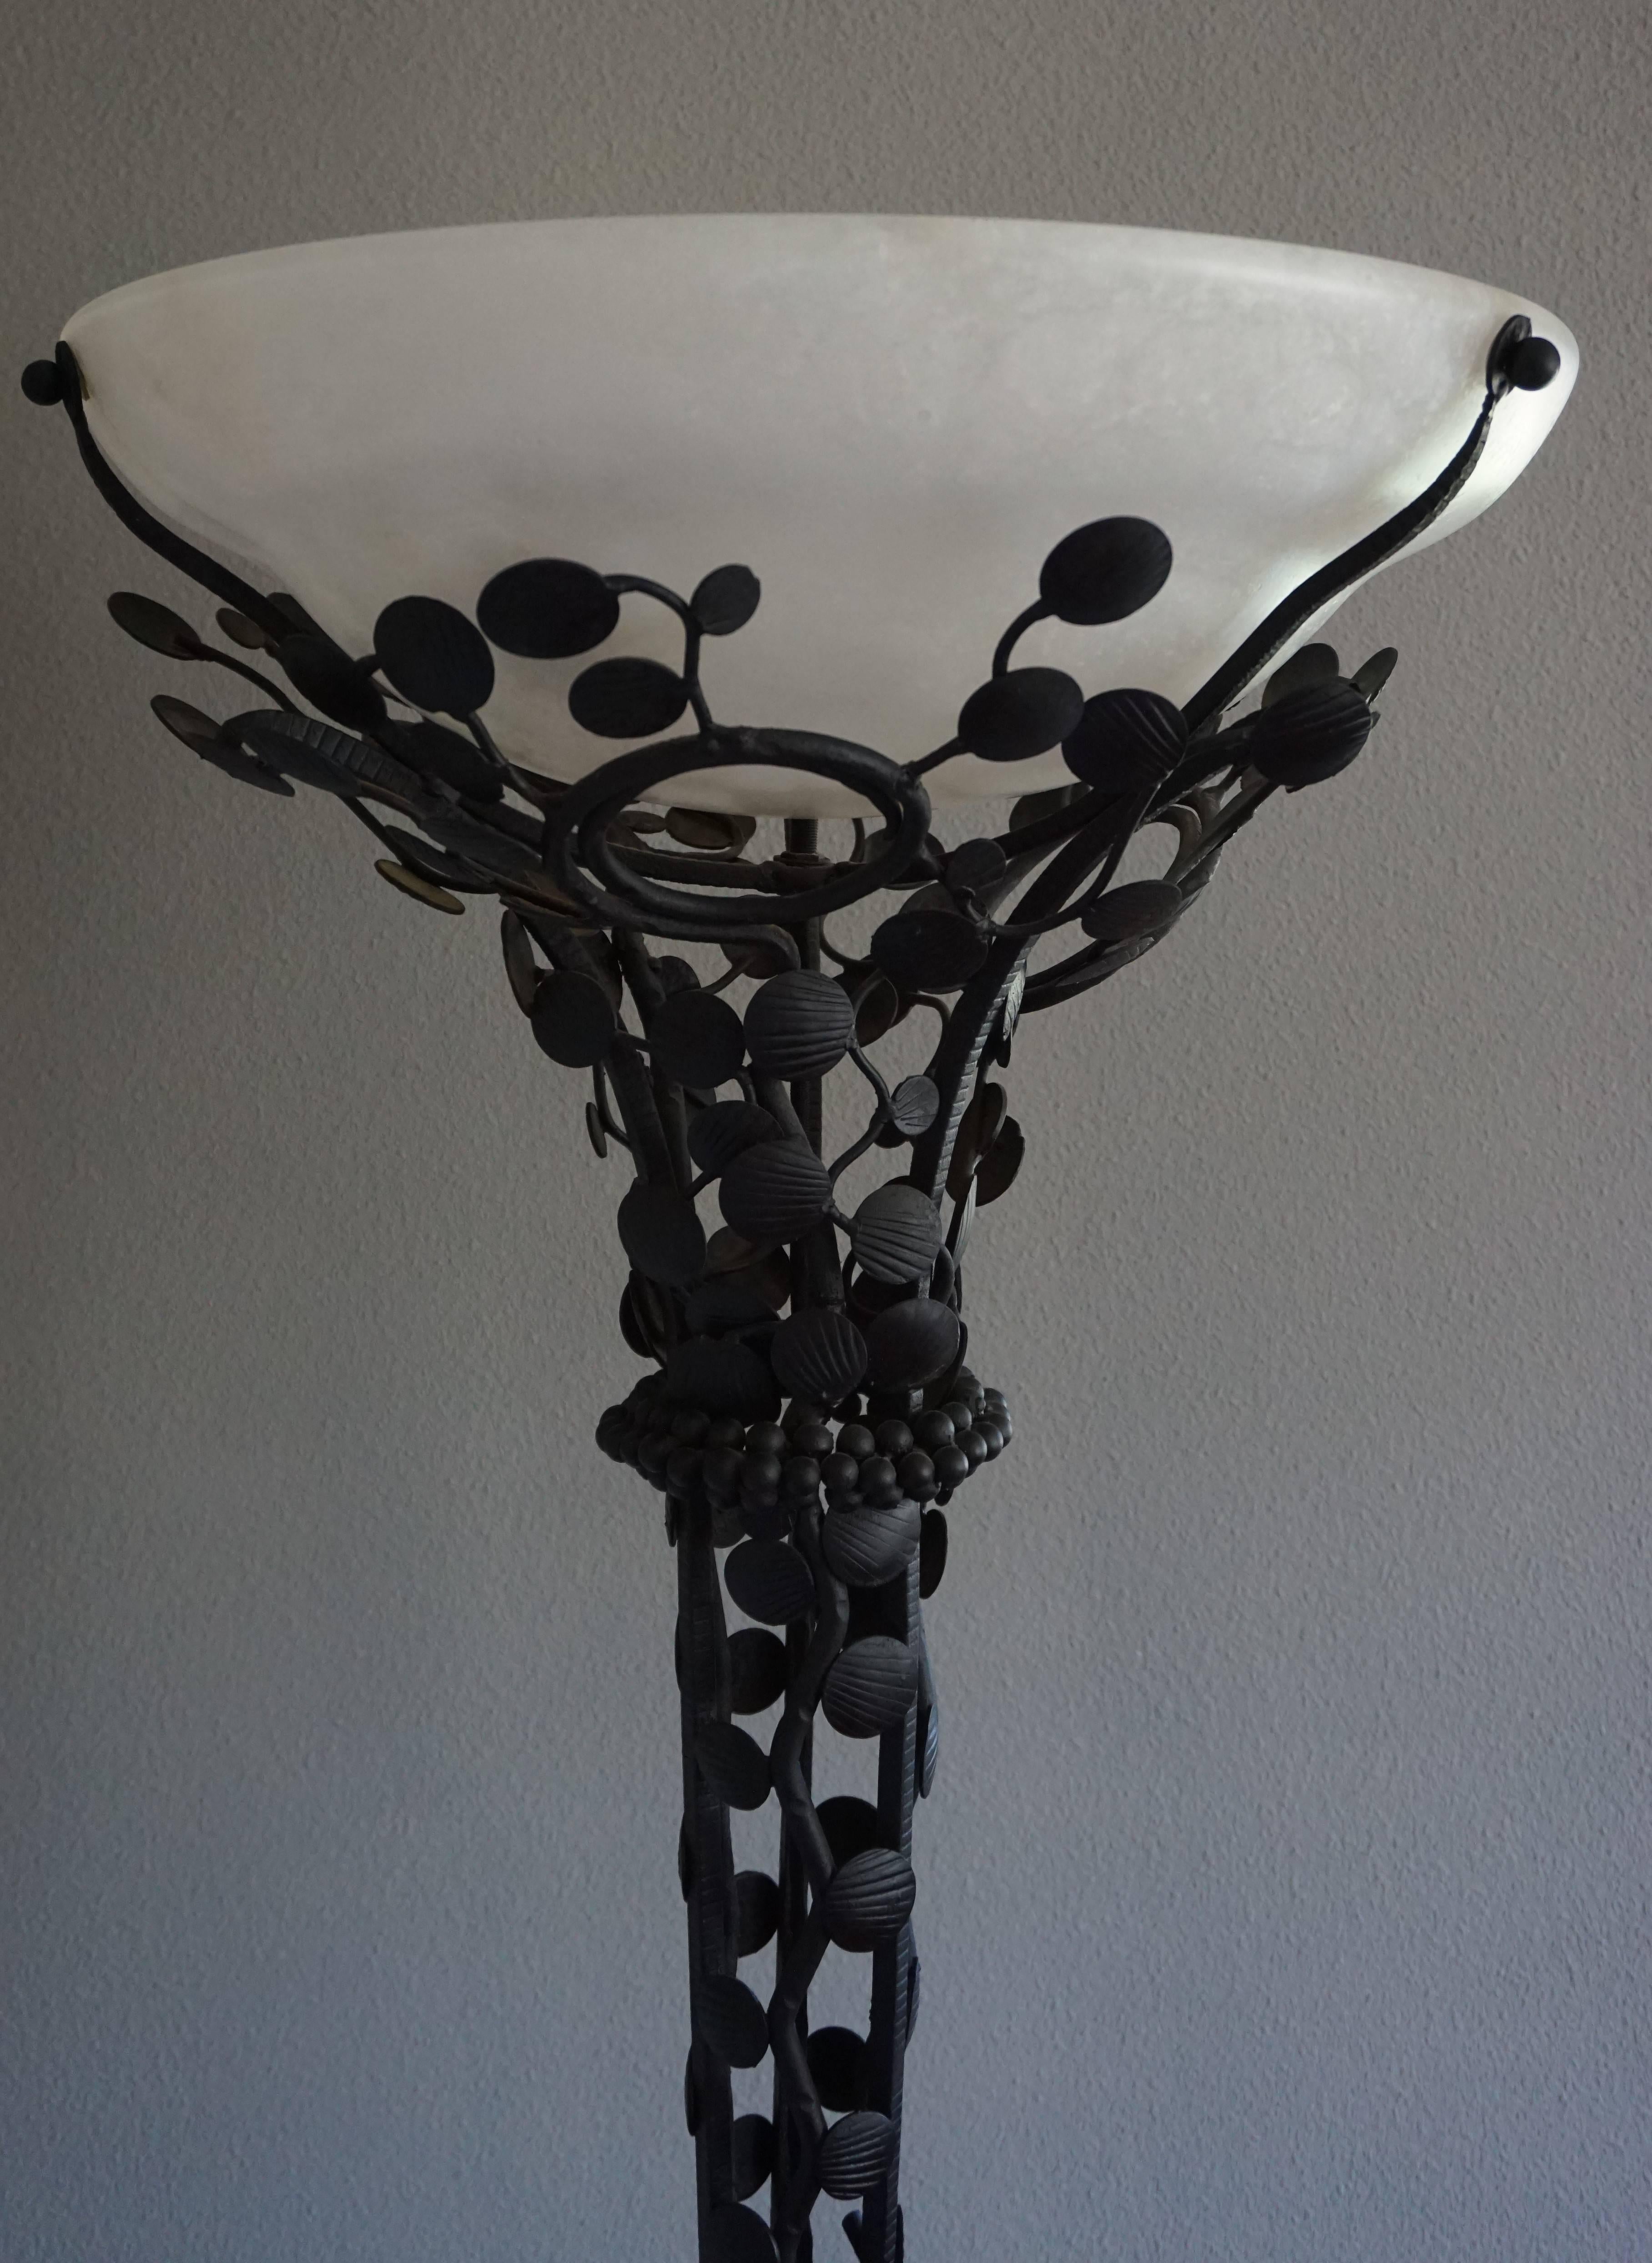 Handcrafted Art Deco floor lamp in the manner of Edgar Brandt.

Finding the right floor lamp for your Art Deco interior can be a pain in the rear, so finding this rare piece, to us, again felt like a blessing. The hand-forged and blackened,